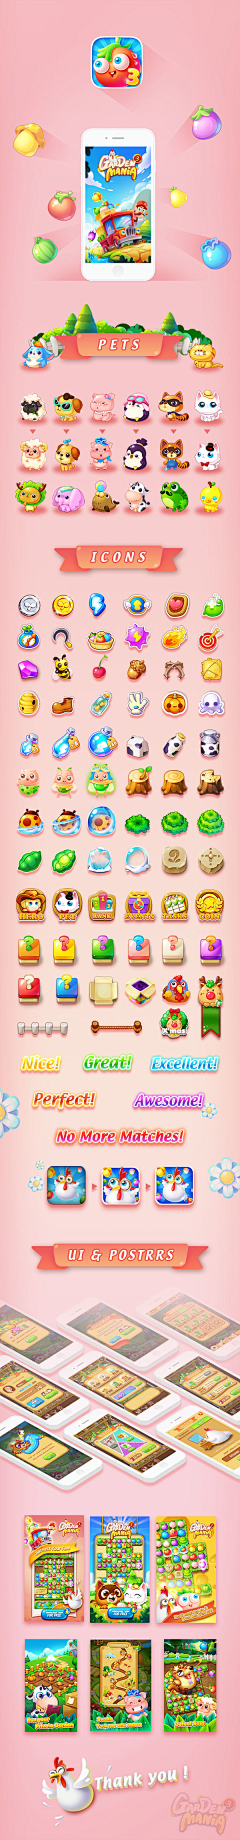 voskreshenie采集到Game objects - icons